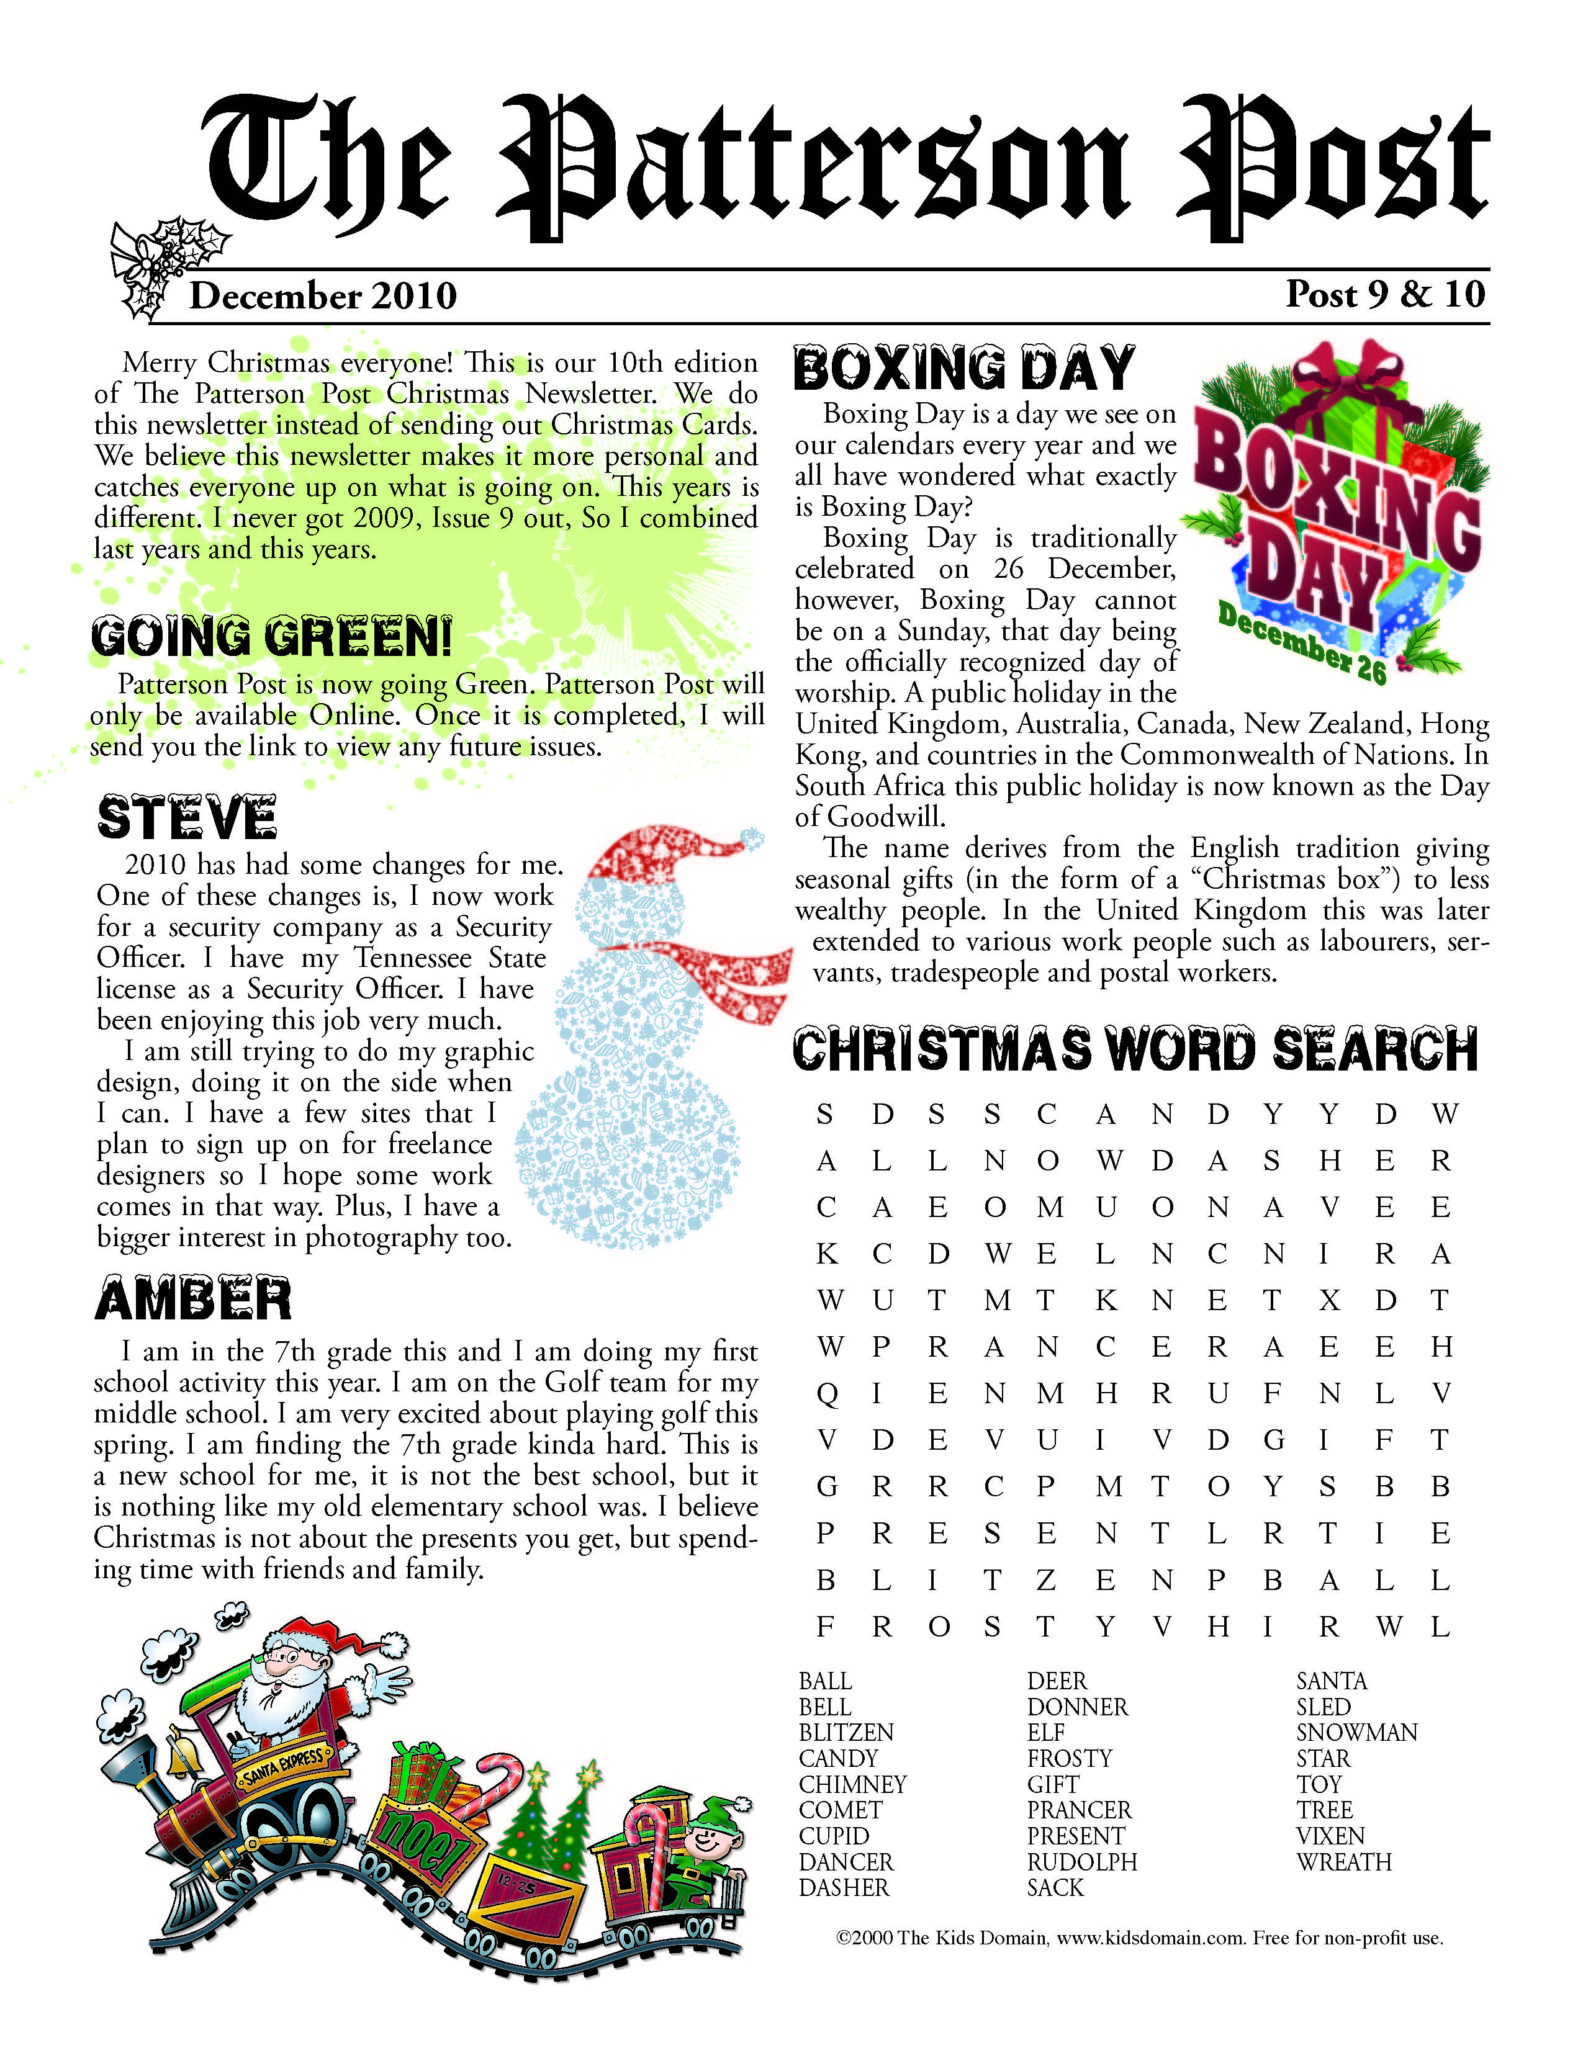 Patterson Post 09/10 Christmas Newsletter Cover